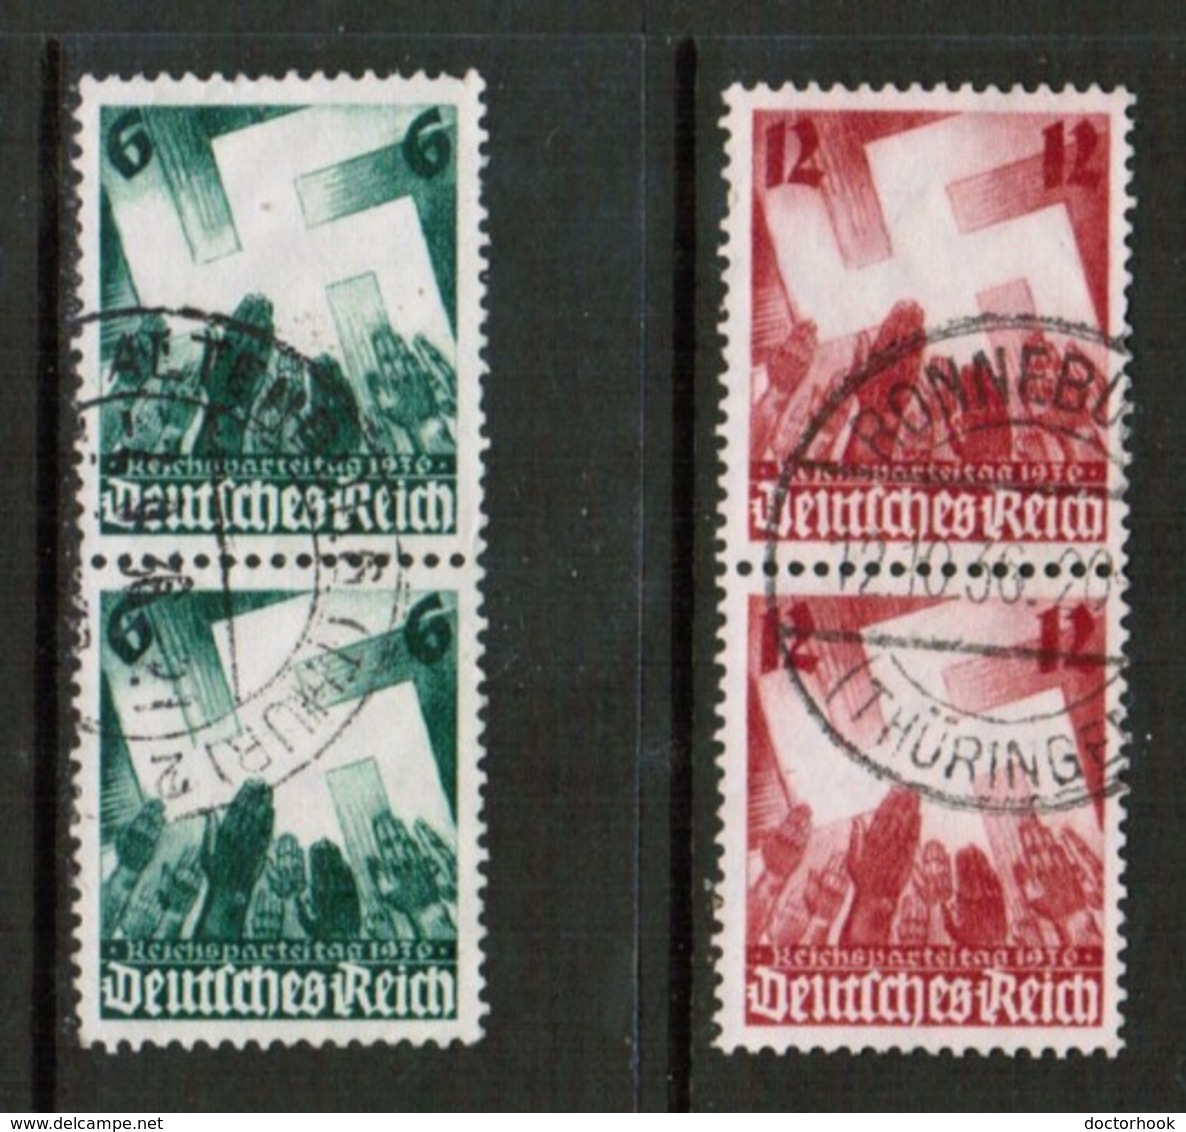 GERMANY  Scott # 479-80 VF USED PAIRS (Stamp Scan # 452) - Used Stamps